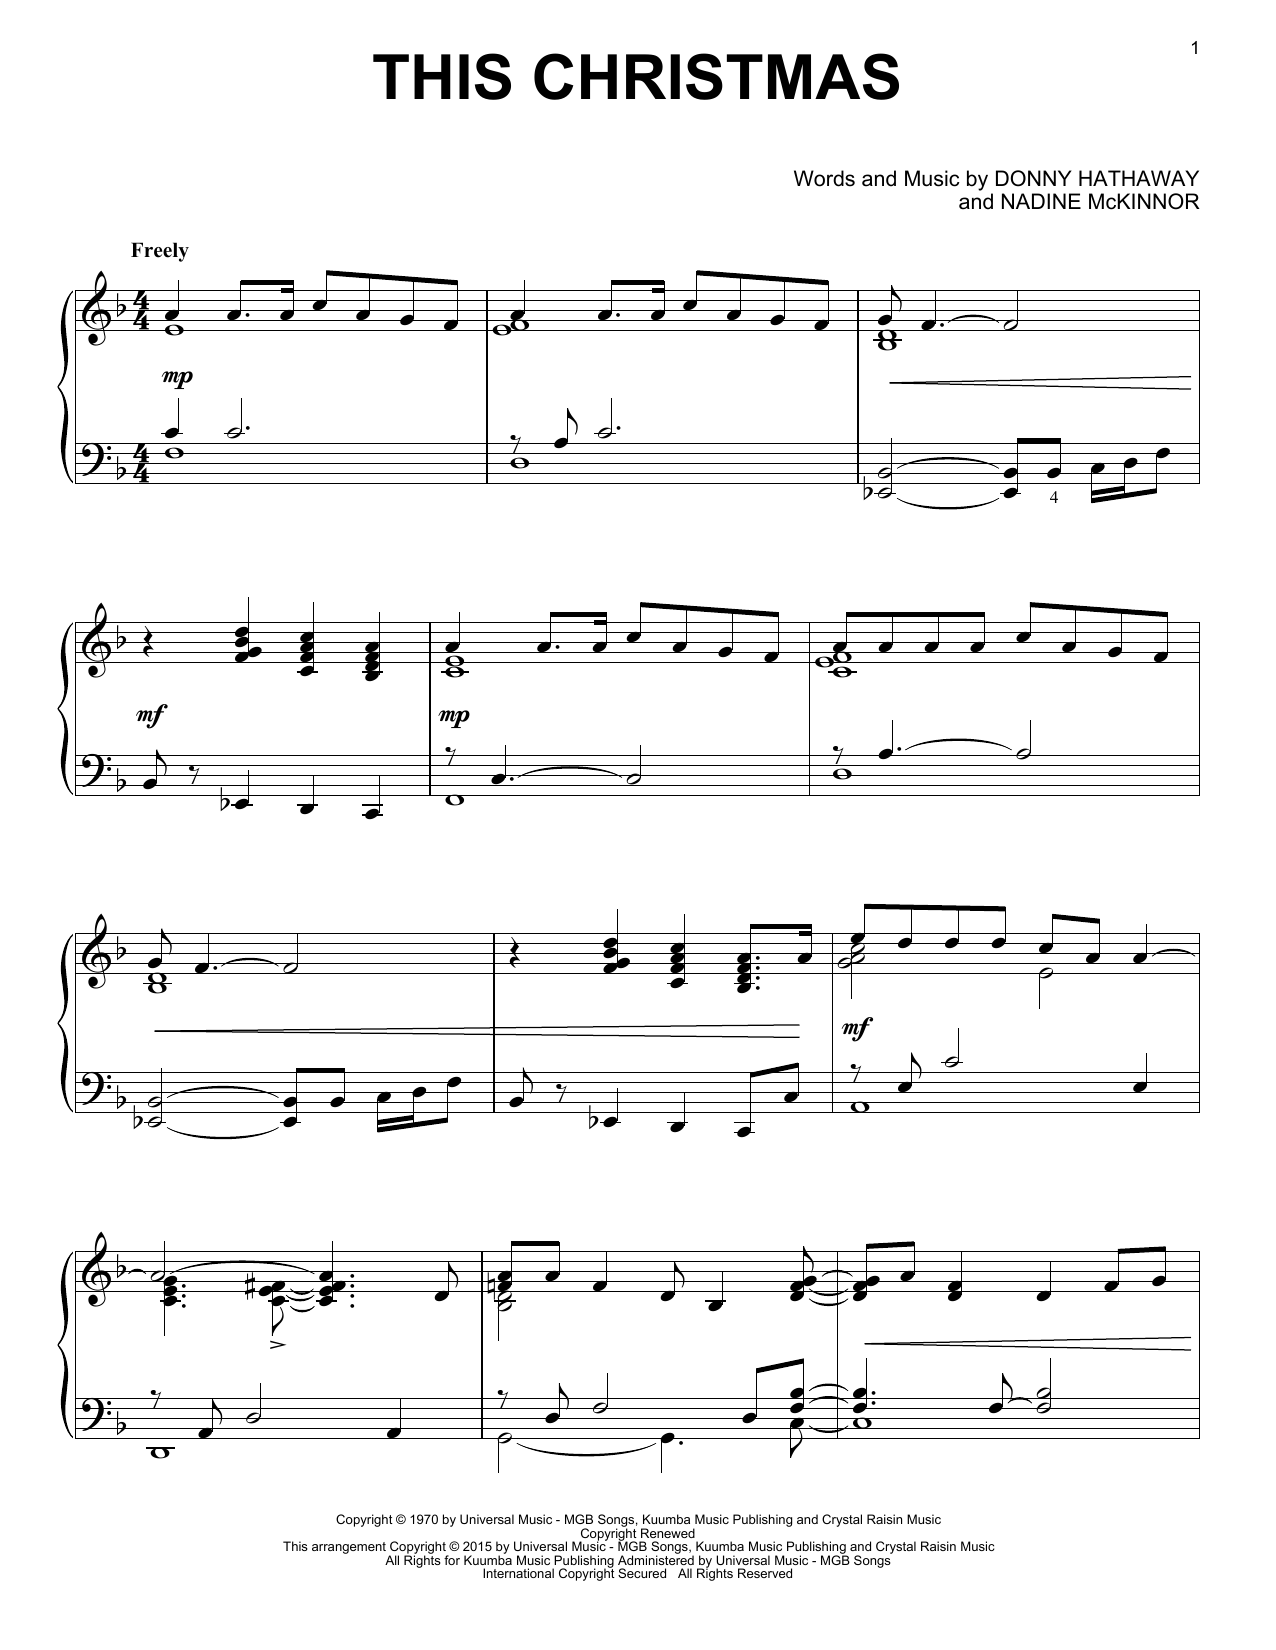 Donny Hathaway This Christmas sheet music notes and chords. Download Printable PDF.